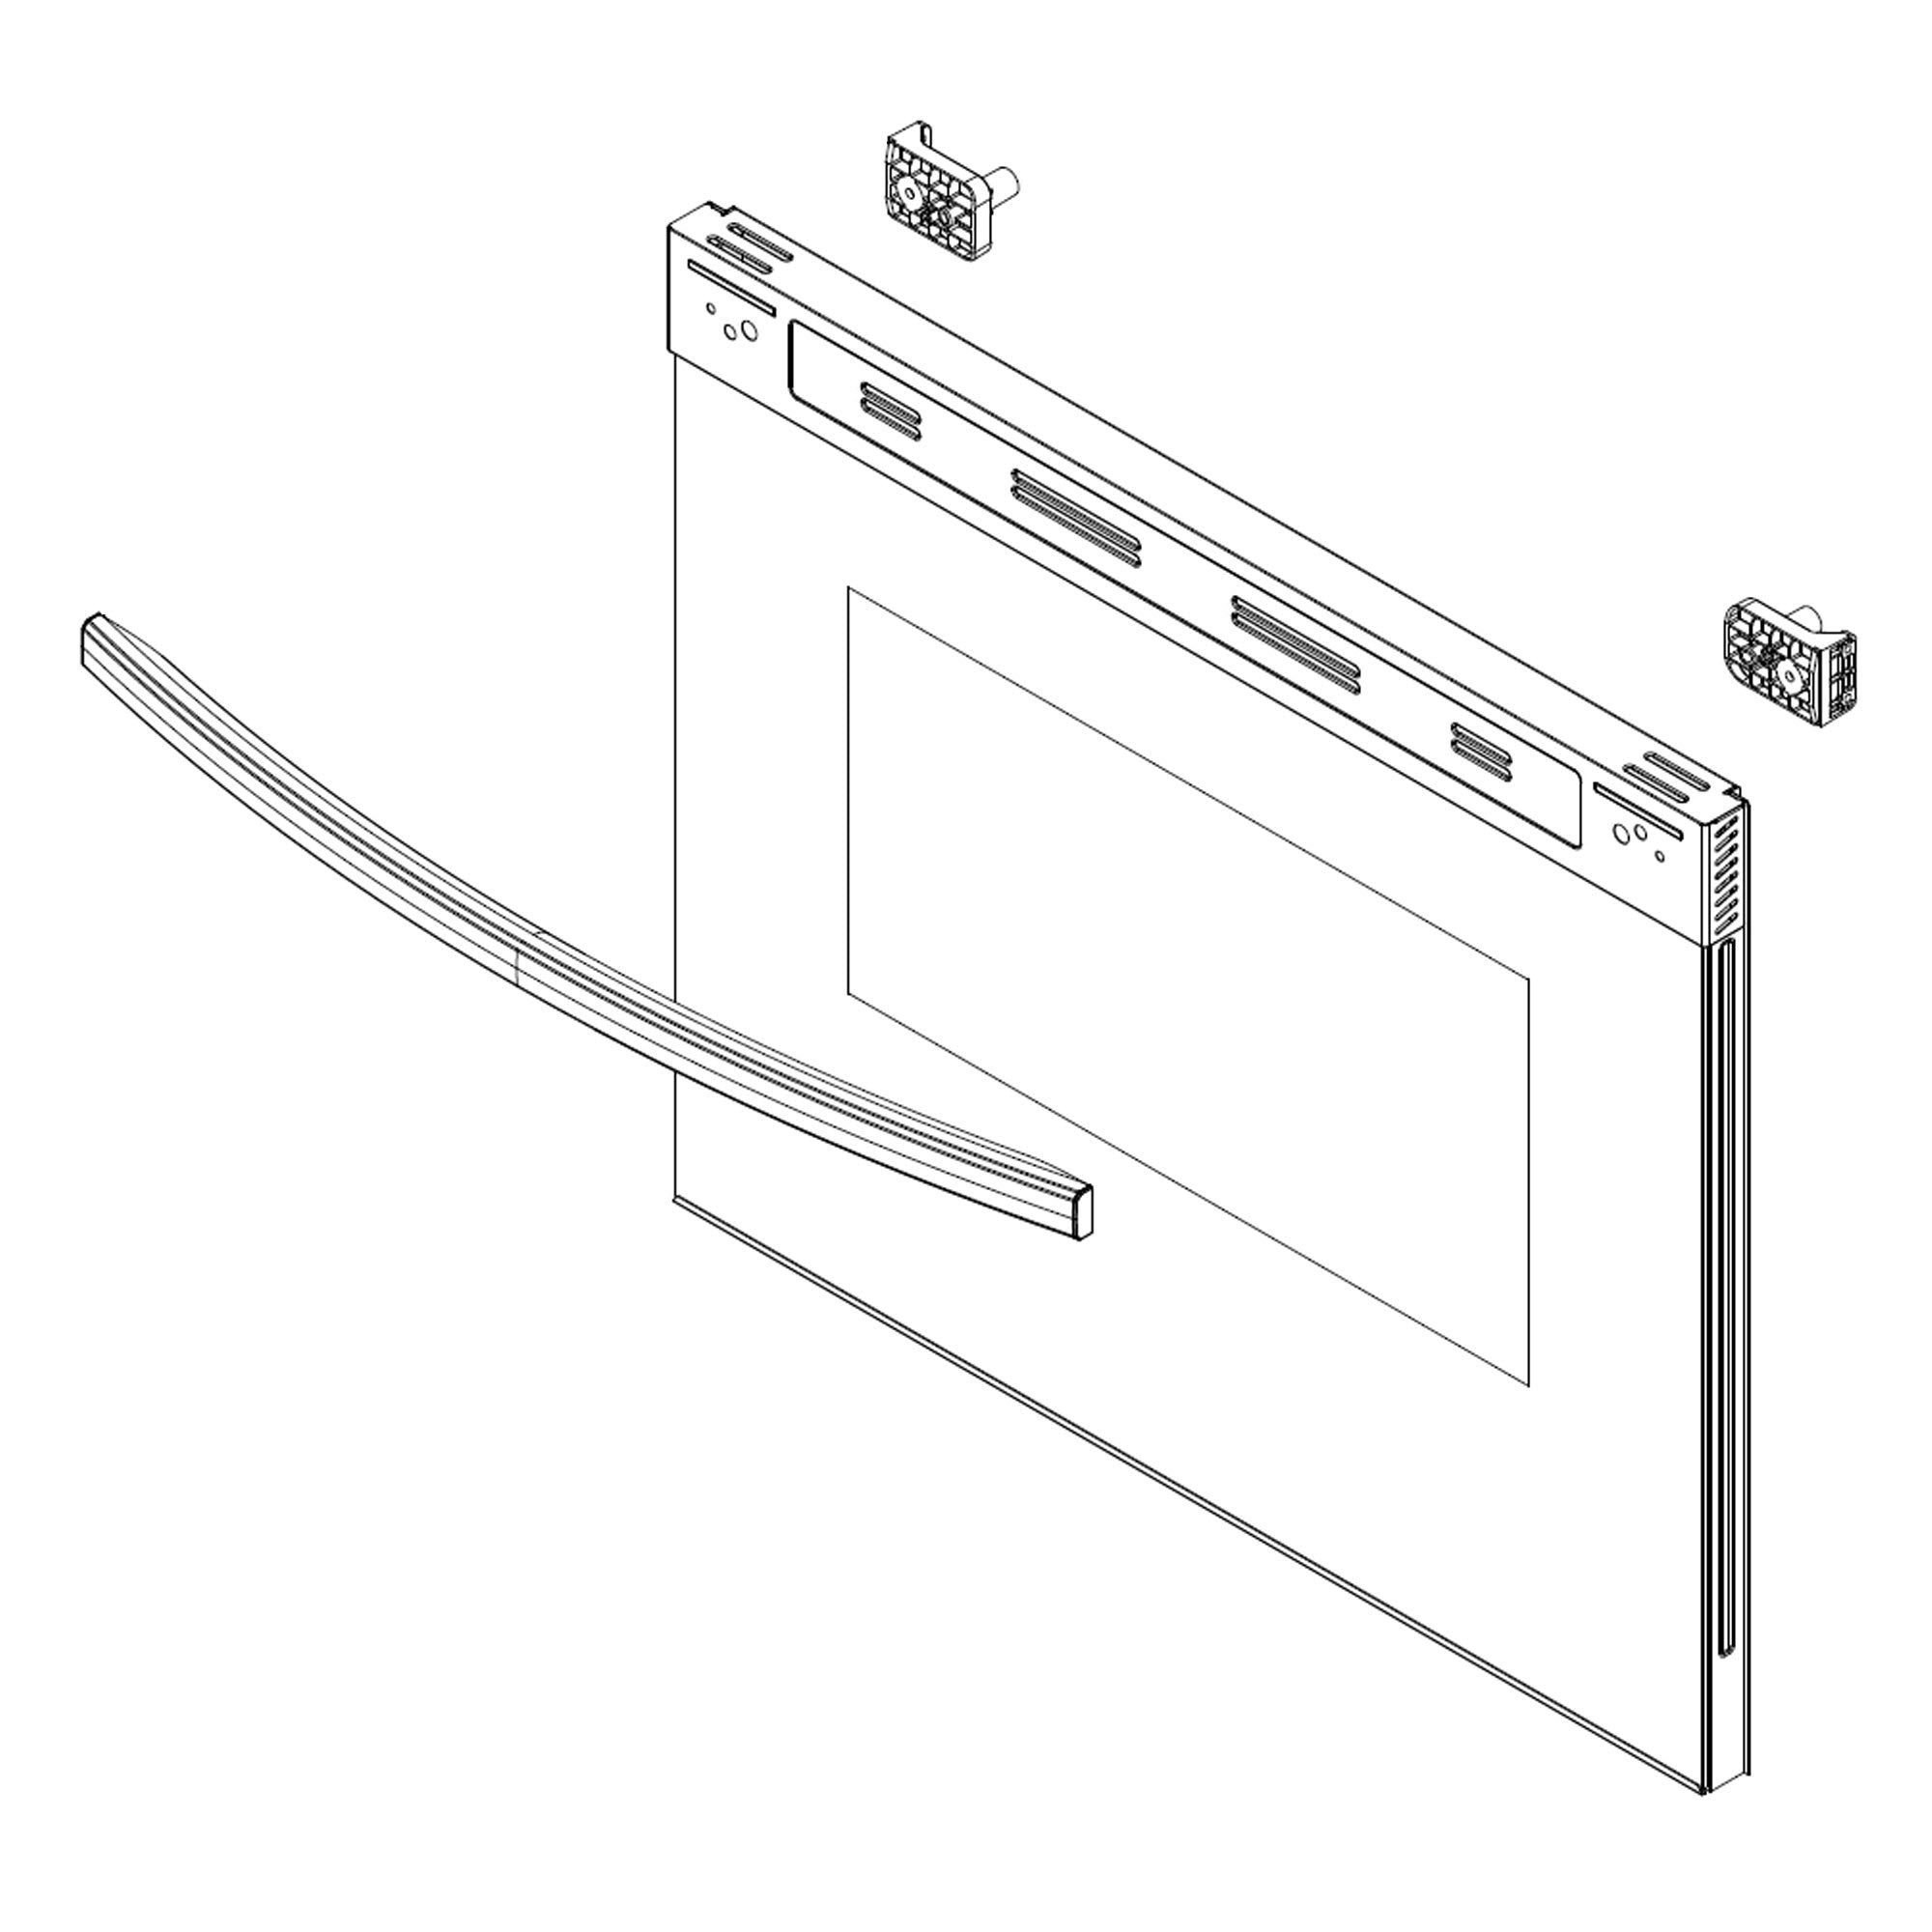 Samsung DG94-04079A Range Oven Door Outer Panel Assembly